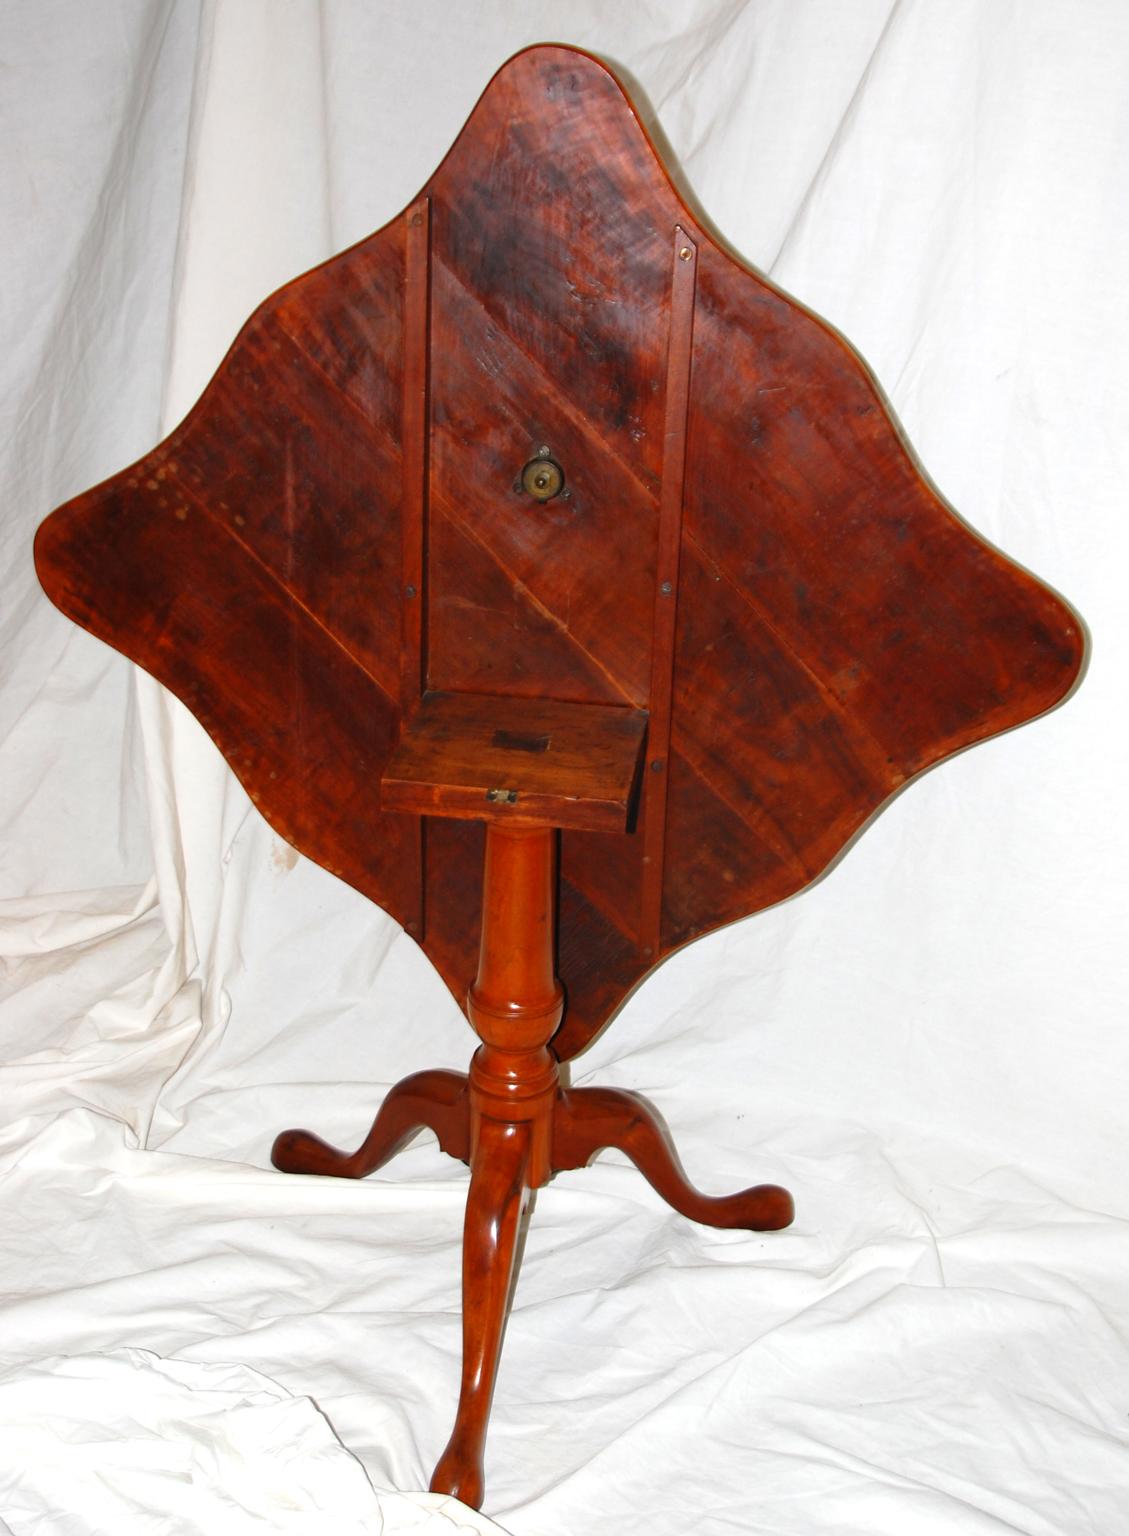 Fruitwood American 18th Century Federal Period Tripod Tilt-Top Table in Apple Wood For Sale